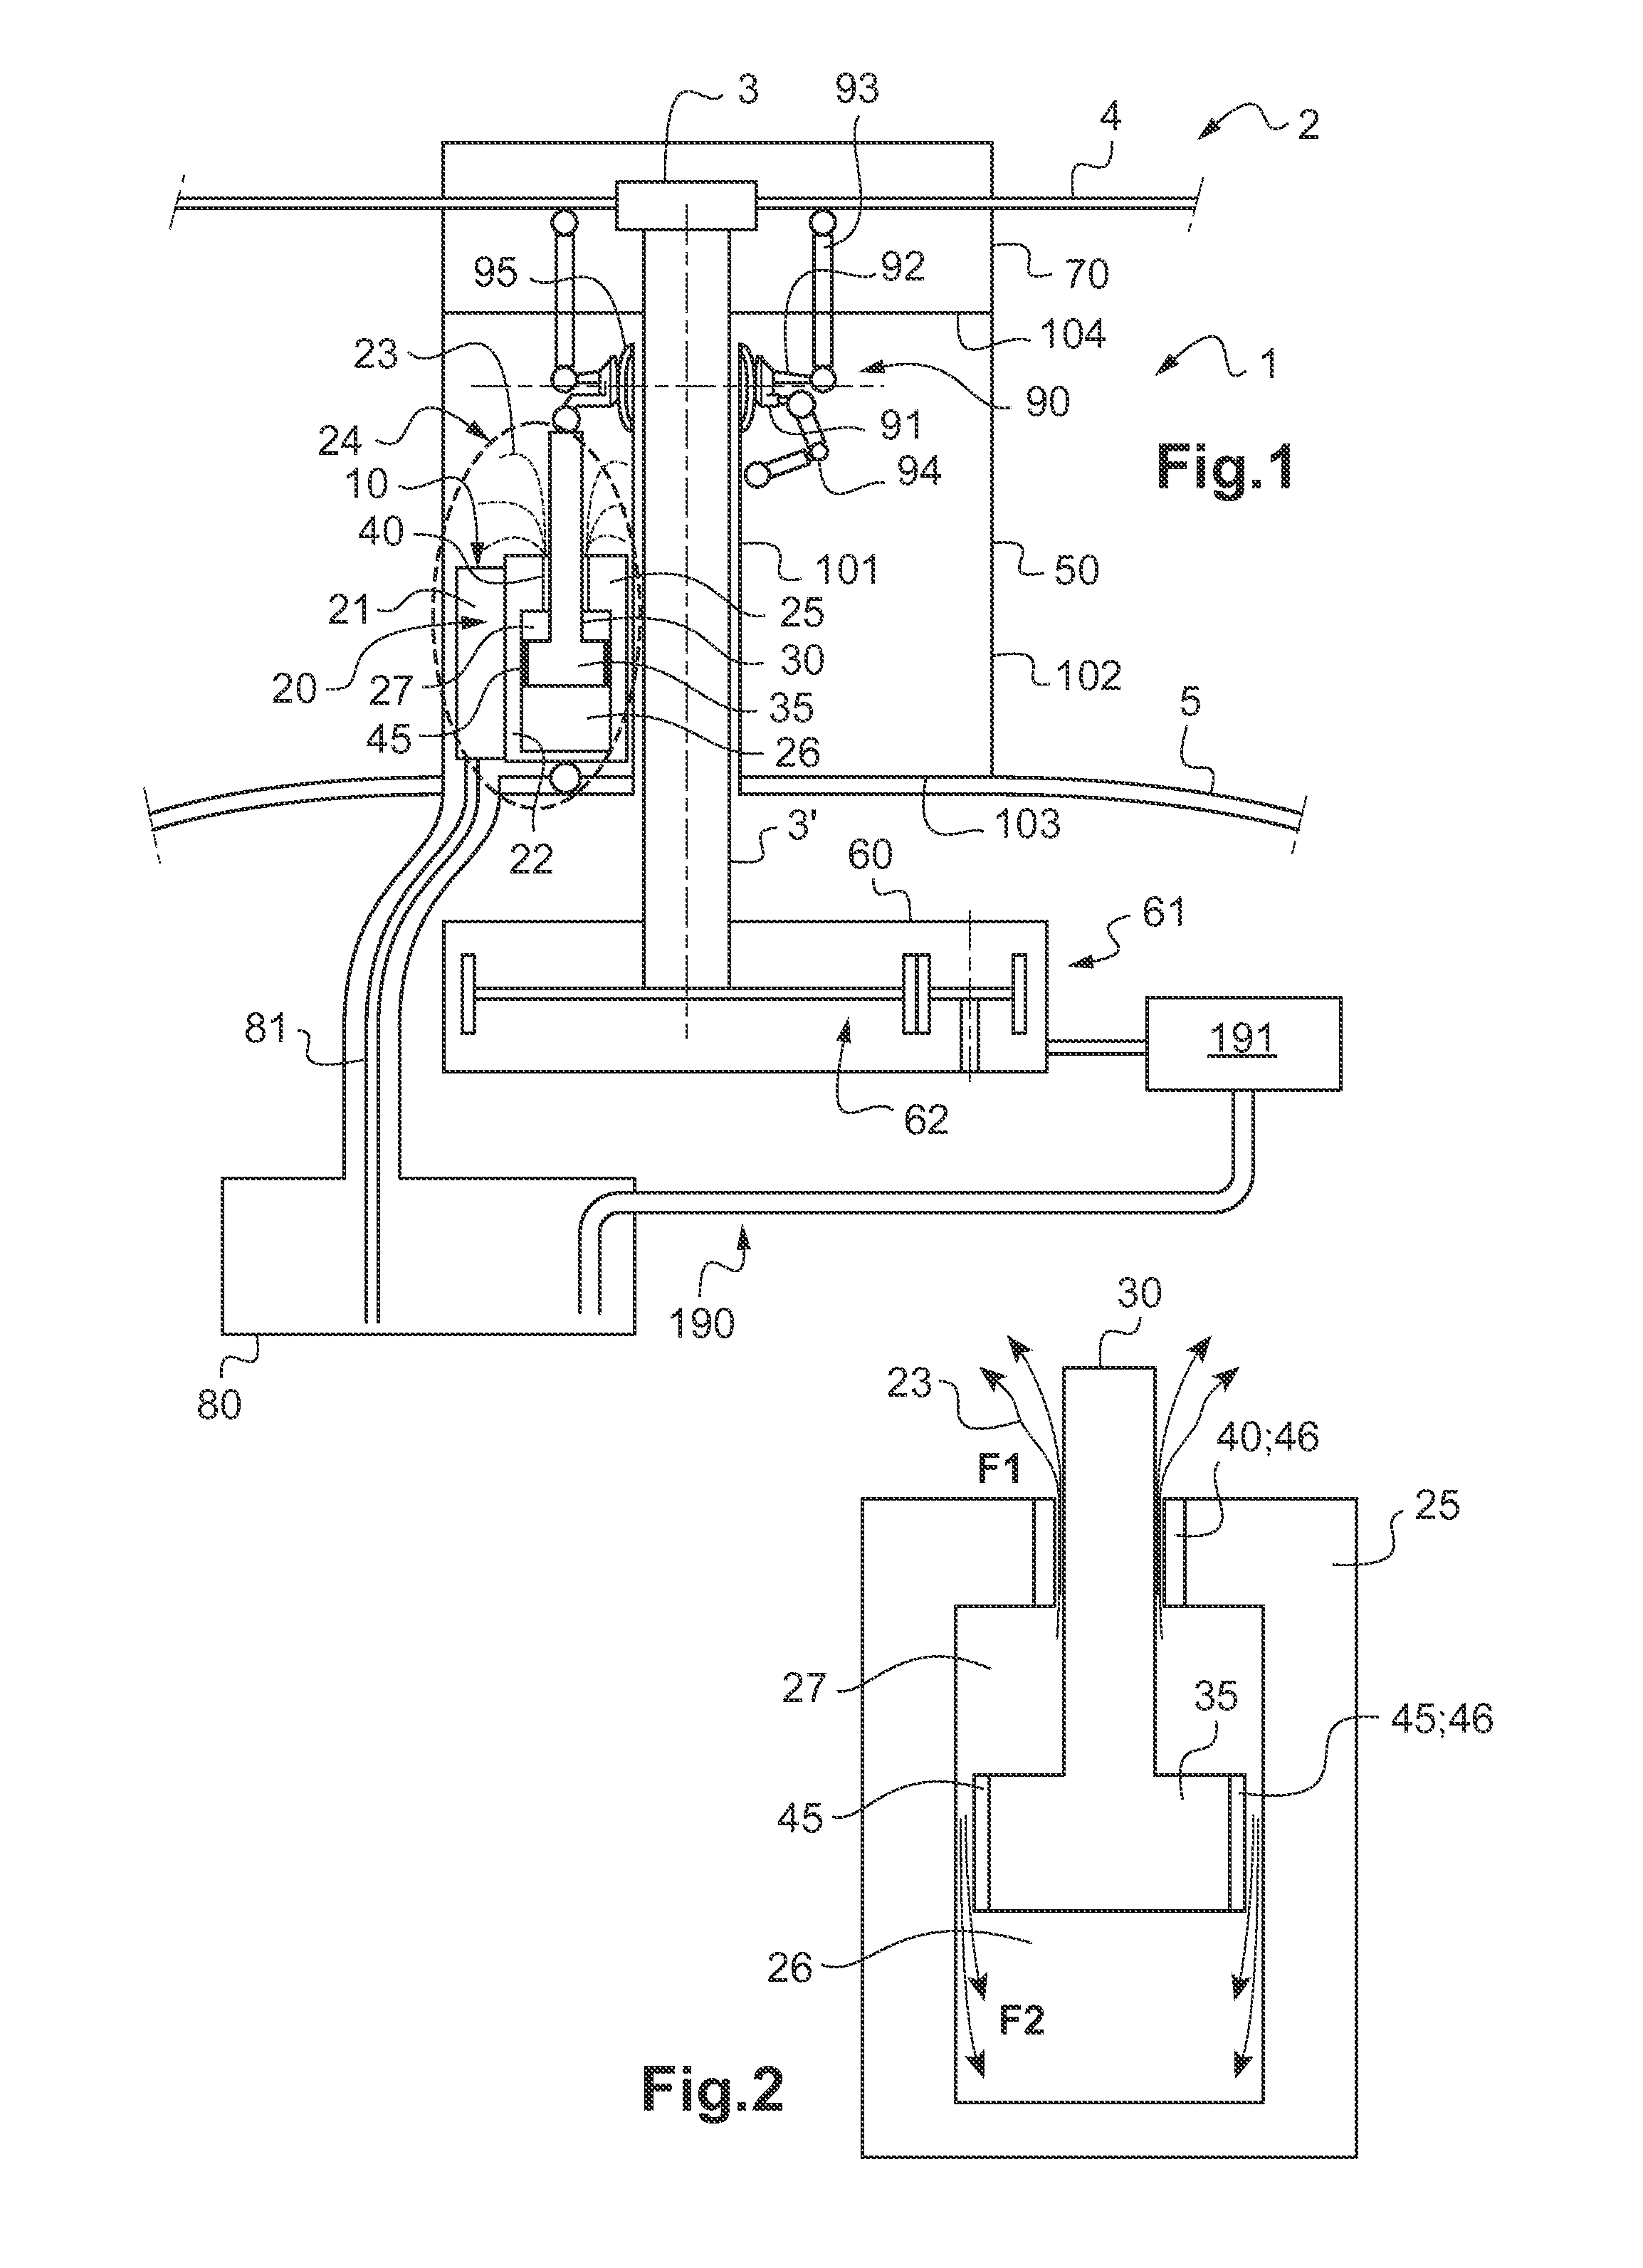 Aircraft hydraulic system comprising at least one servo-control, and an associated rotor and aircraft